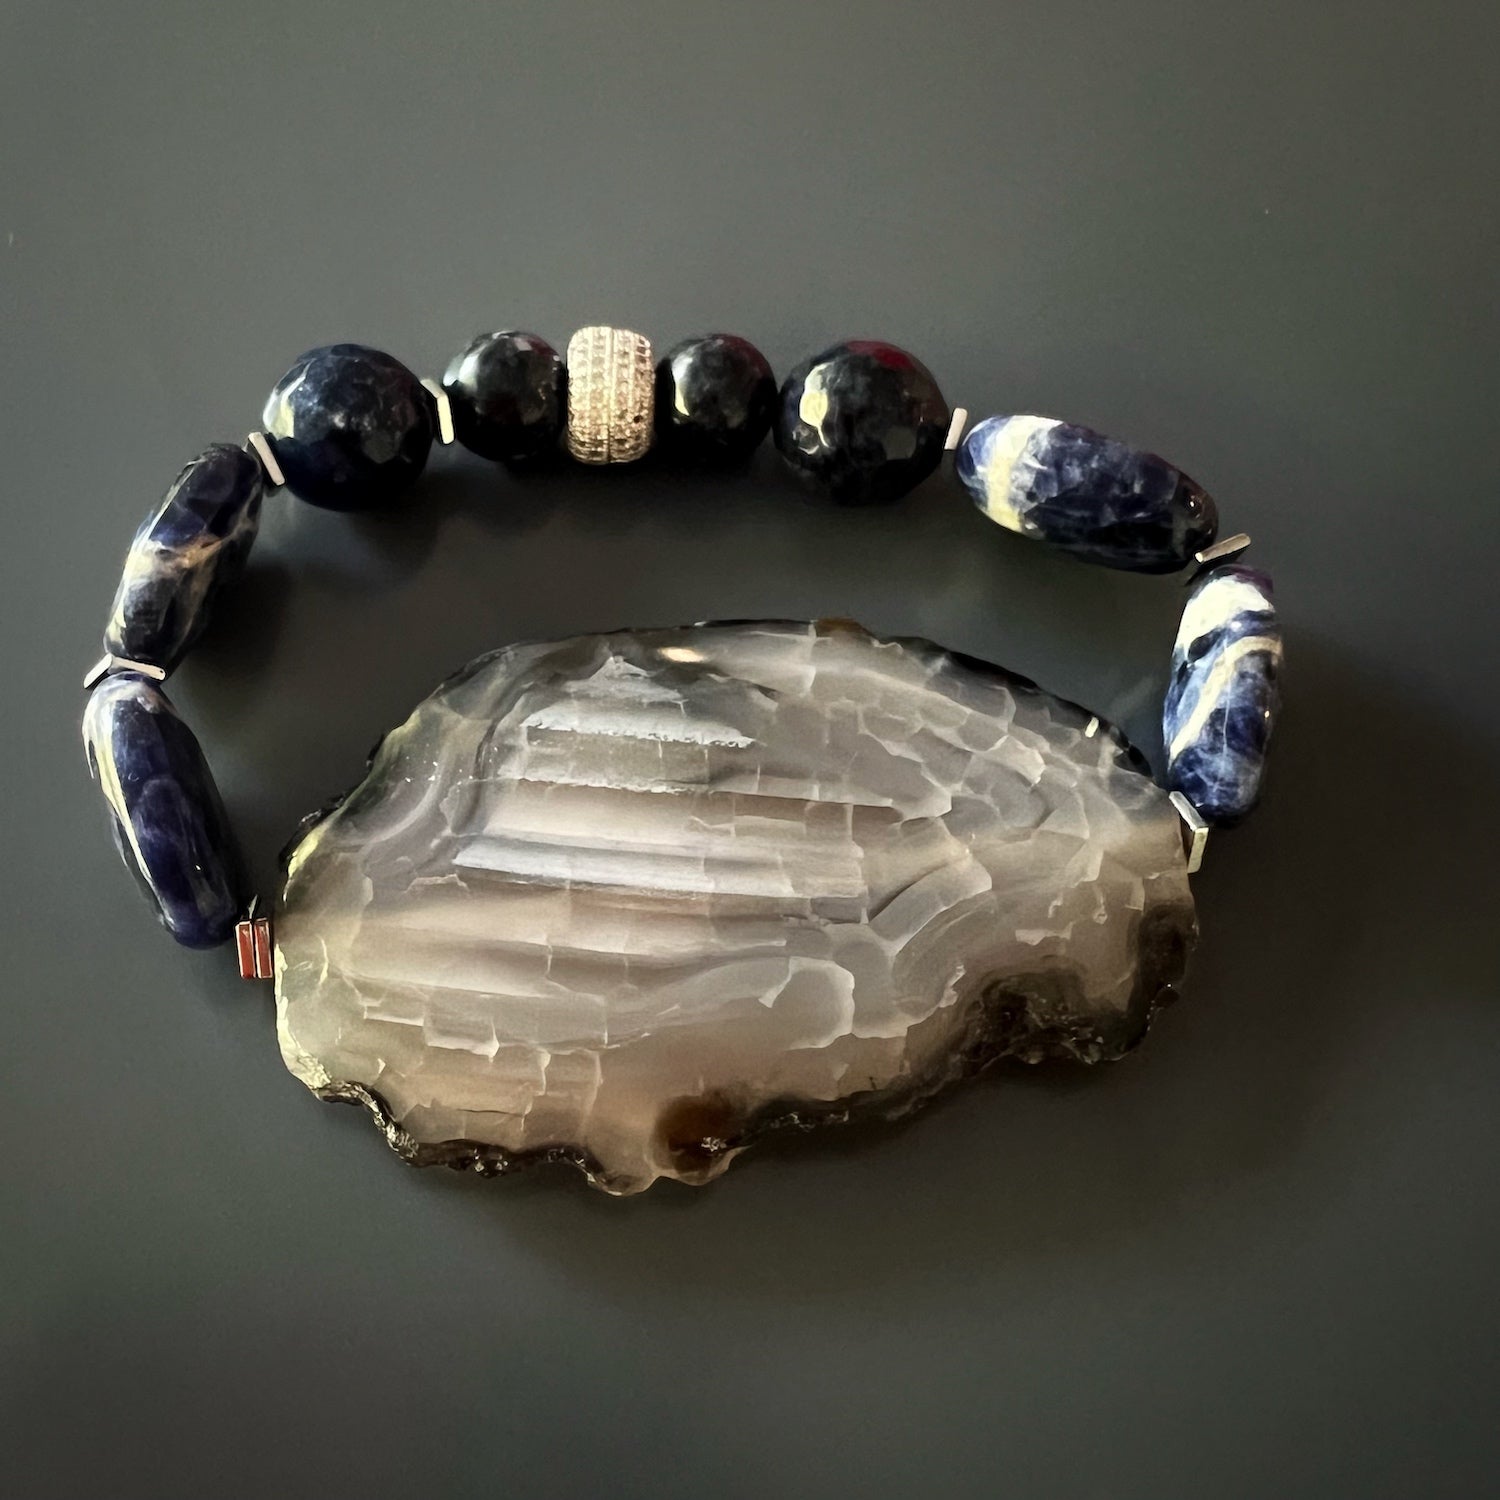 Agate Spiritual Balance Bracelet with blue and white sodalite stones, Swarovski crystals, and chunky agate stones, handmade for unique style and emotional balance.